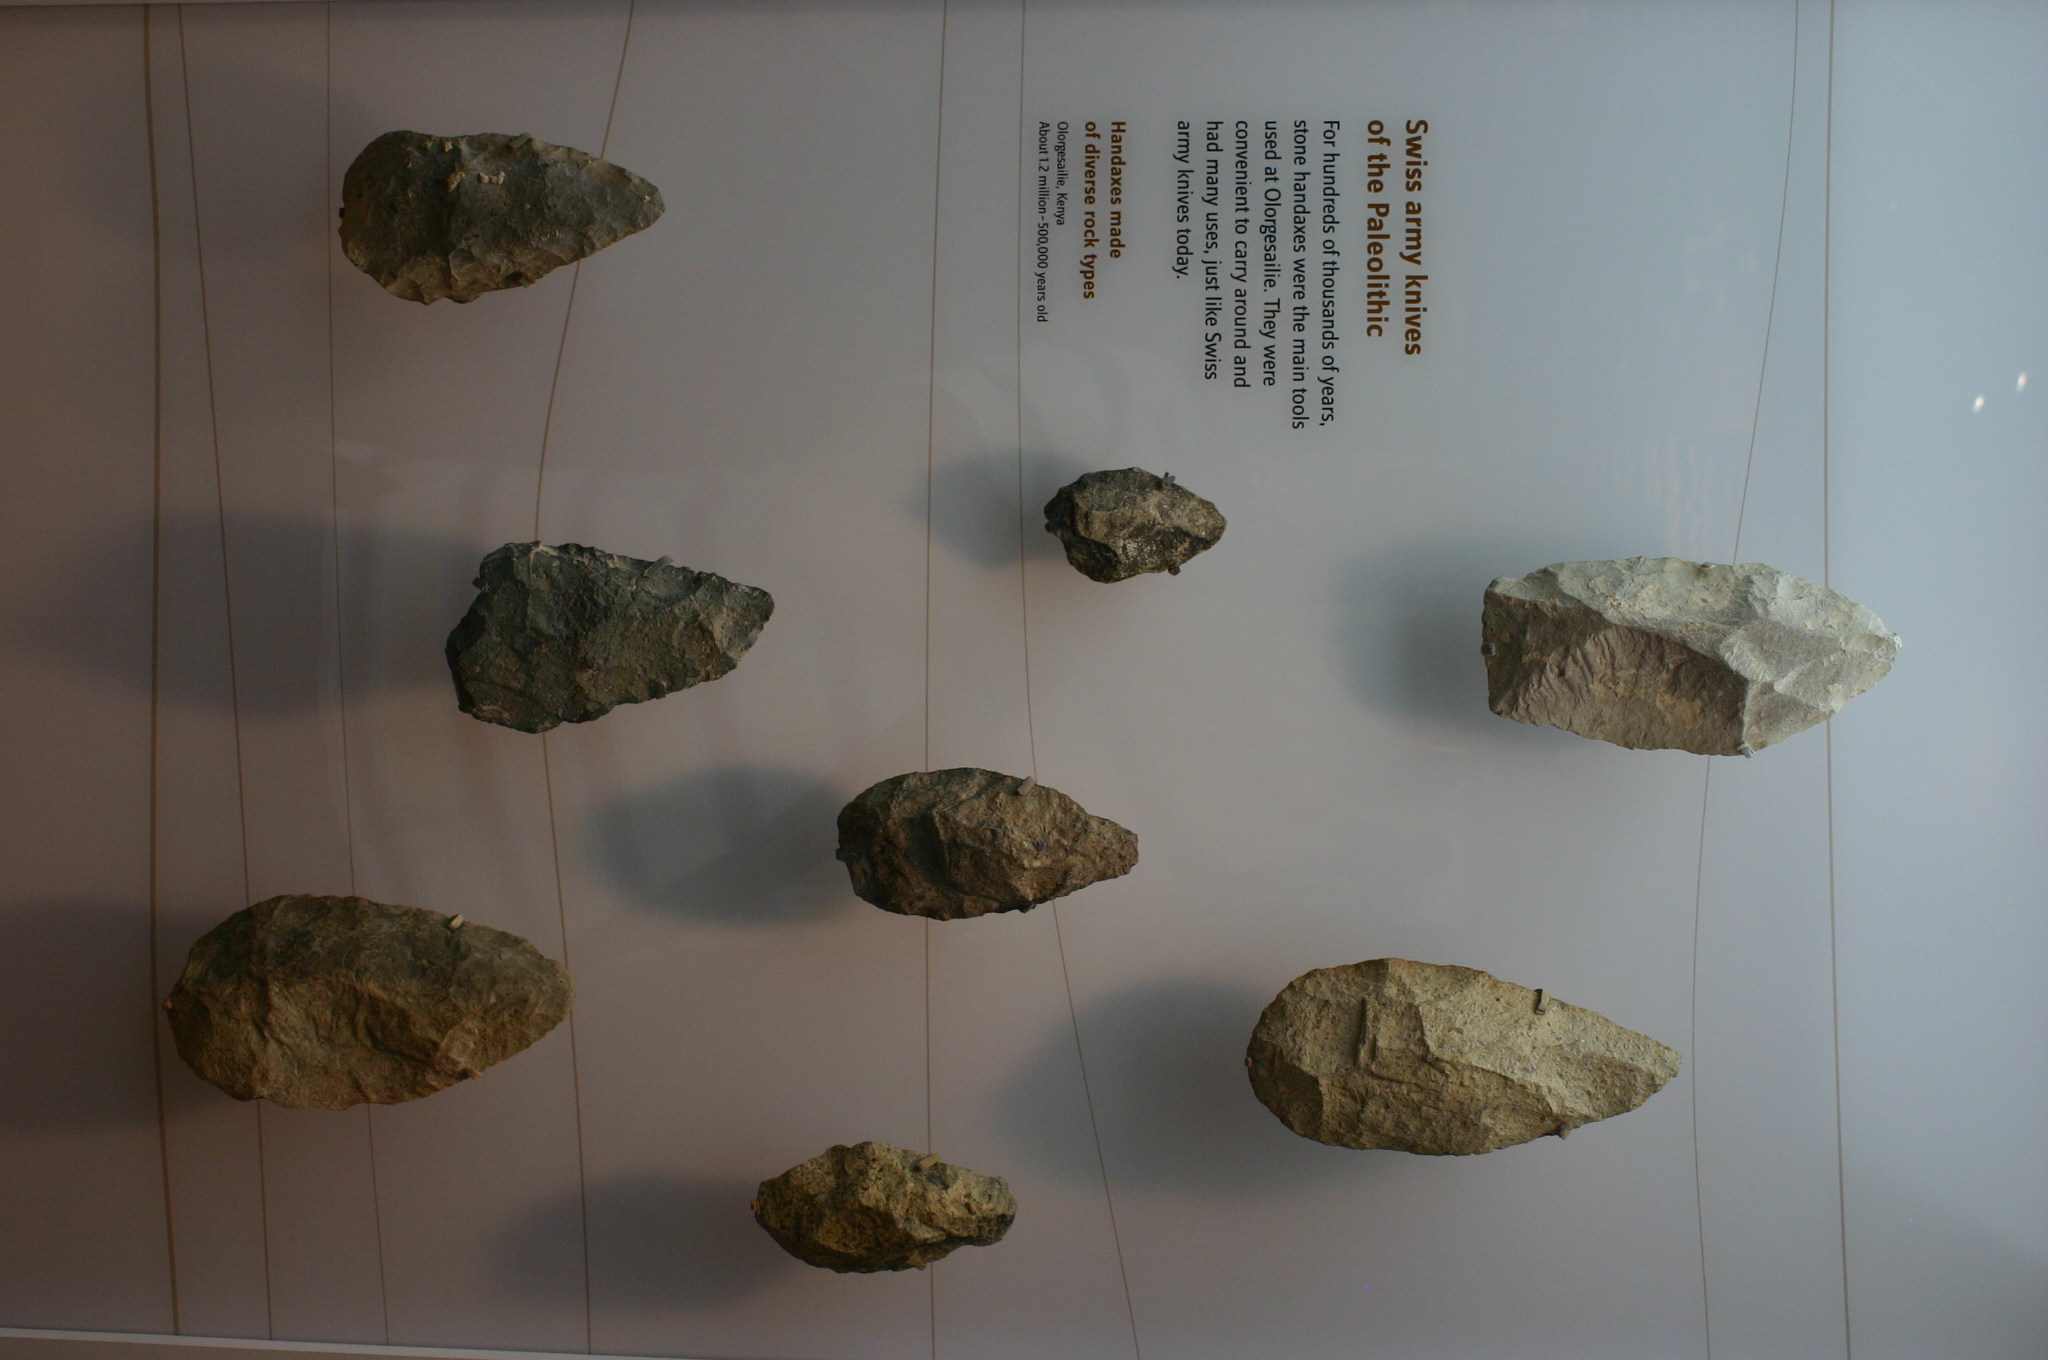 File:Olorgesailie axes.jpg - Wikimedia Commons